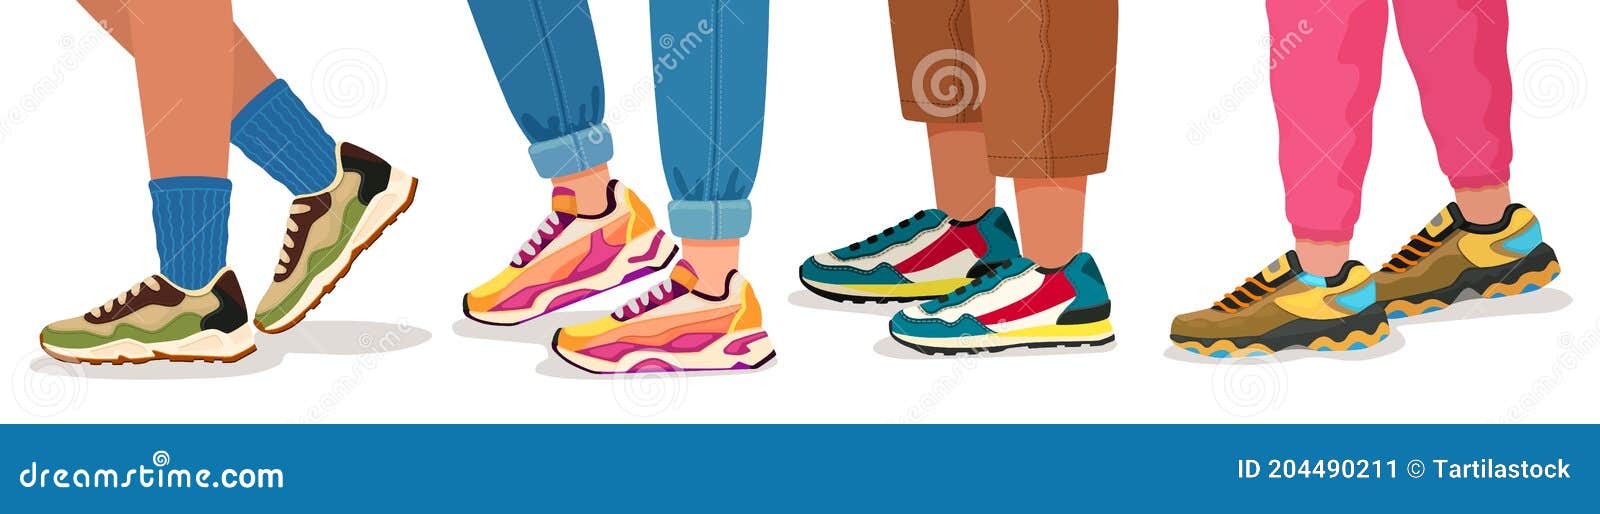 feet in sneakers. female and male walking legs in sport shoes with socks, pants and jeans. trendy fashion fitness